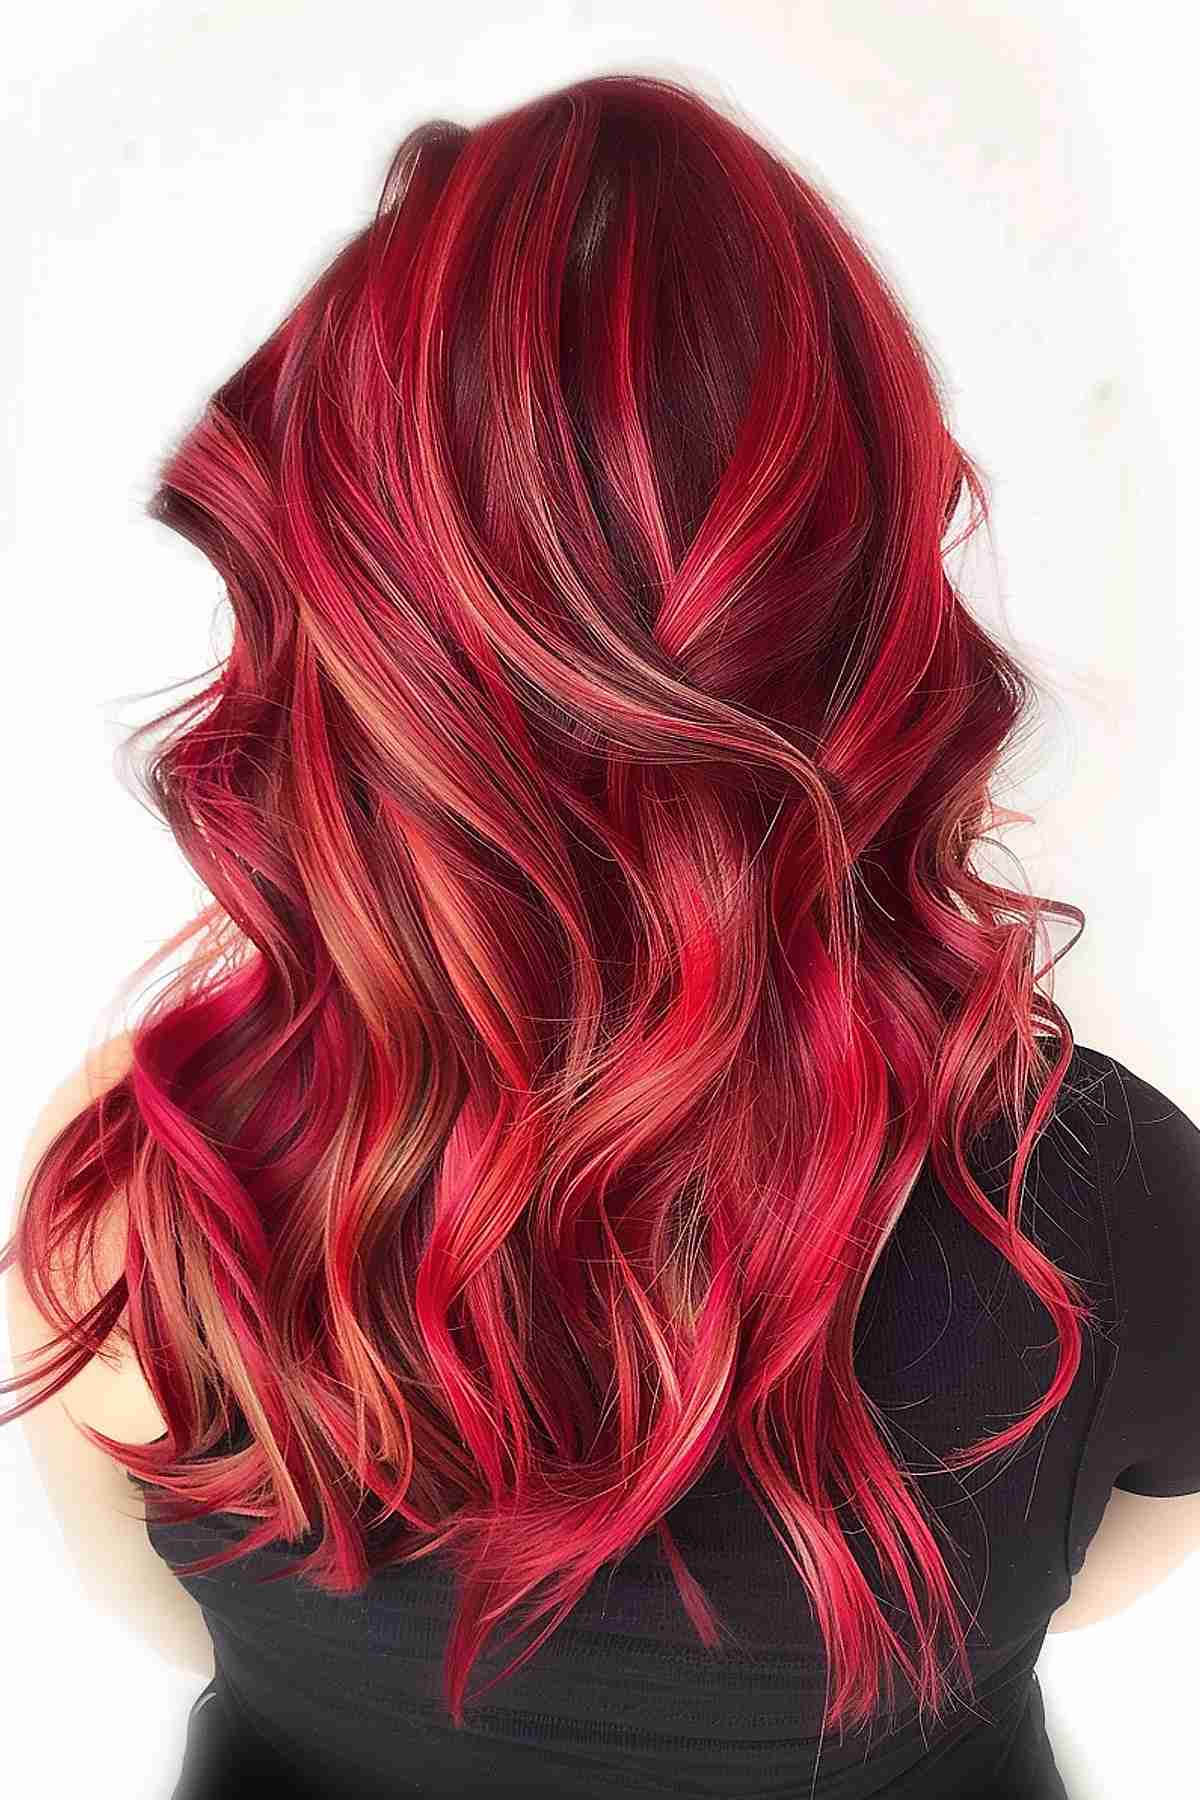 Dense hair with cherry red color and vibrant highlights for a luminous look.